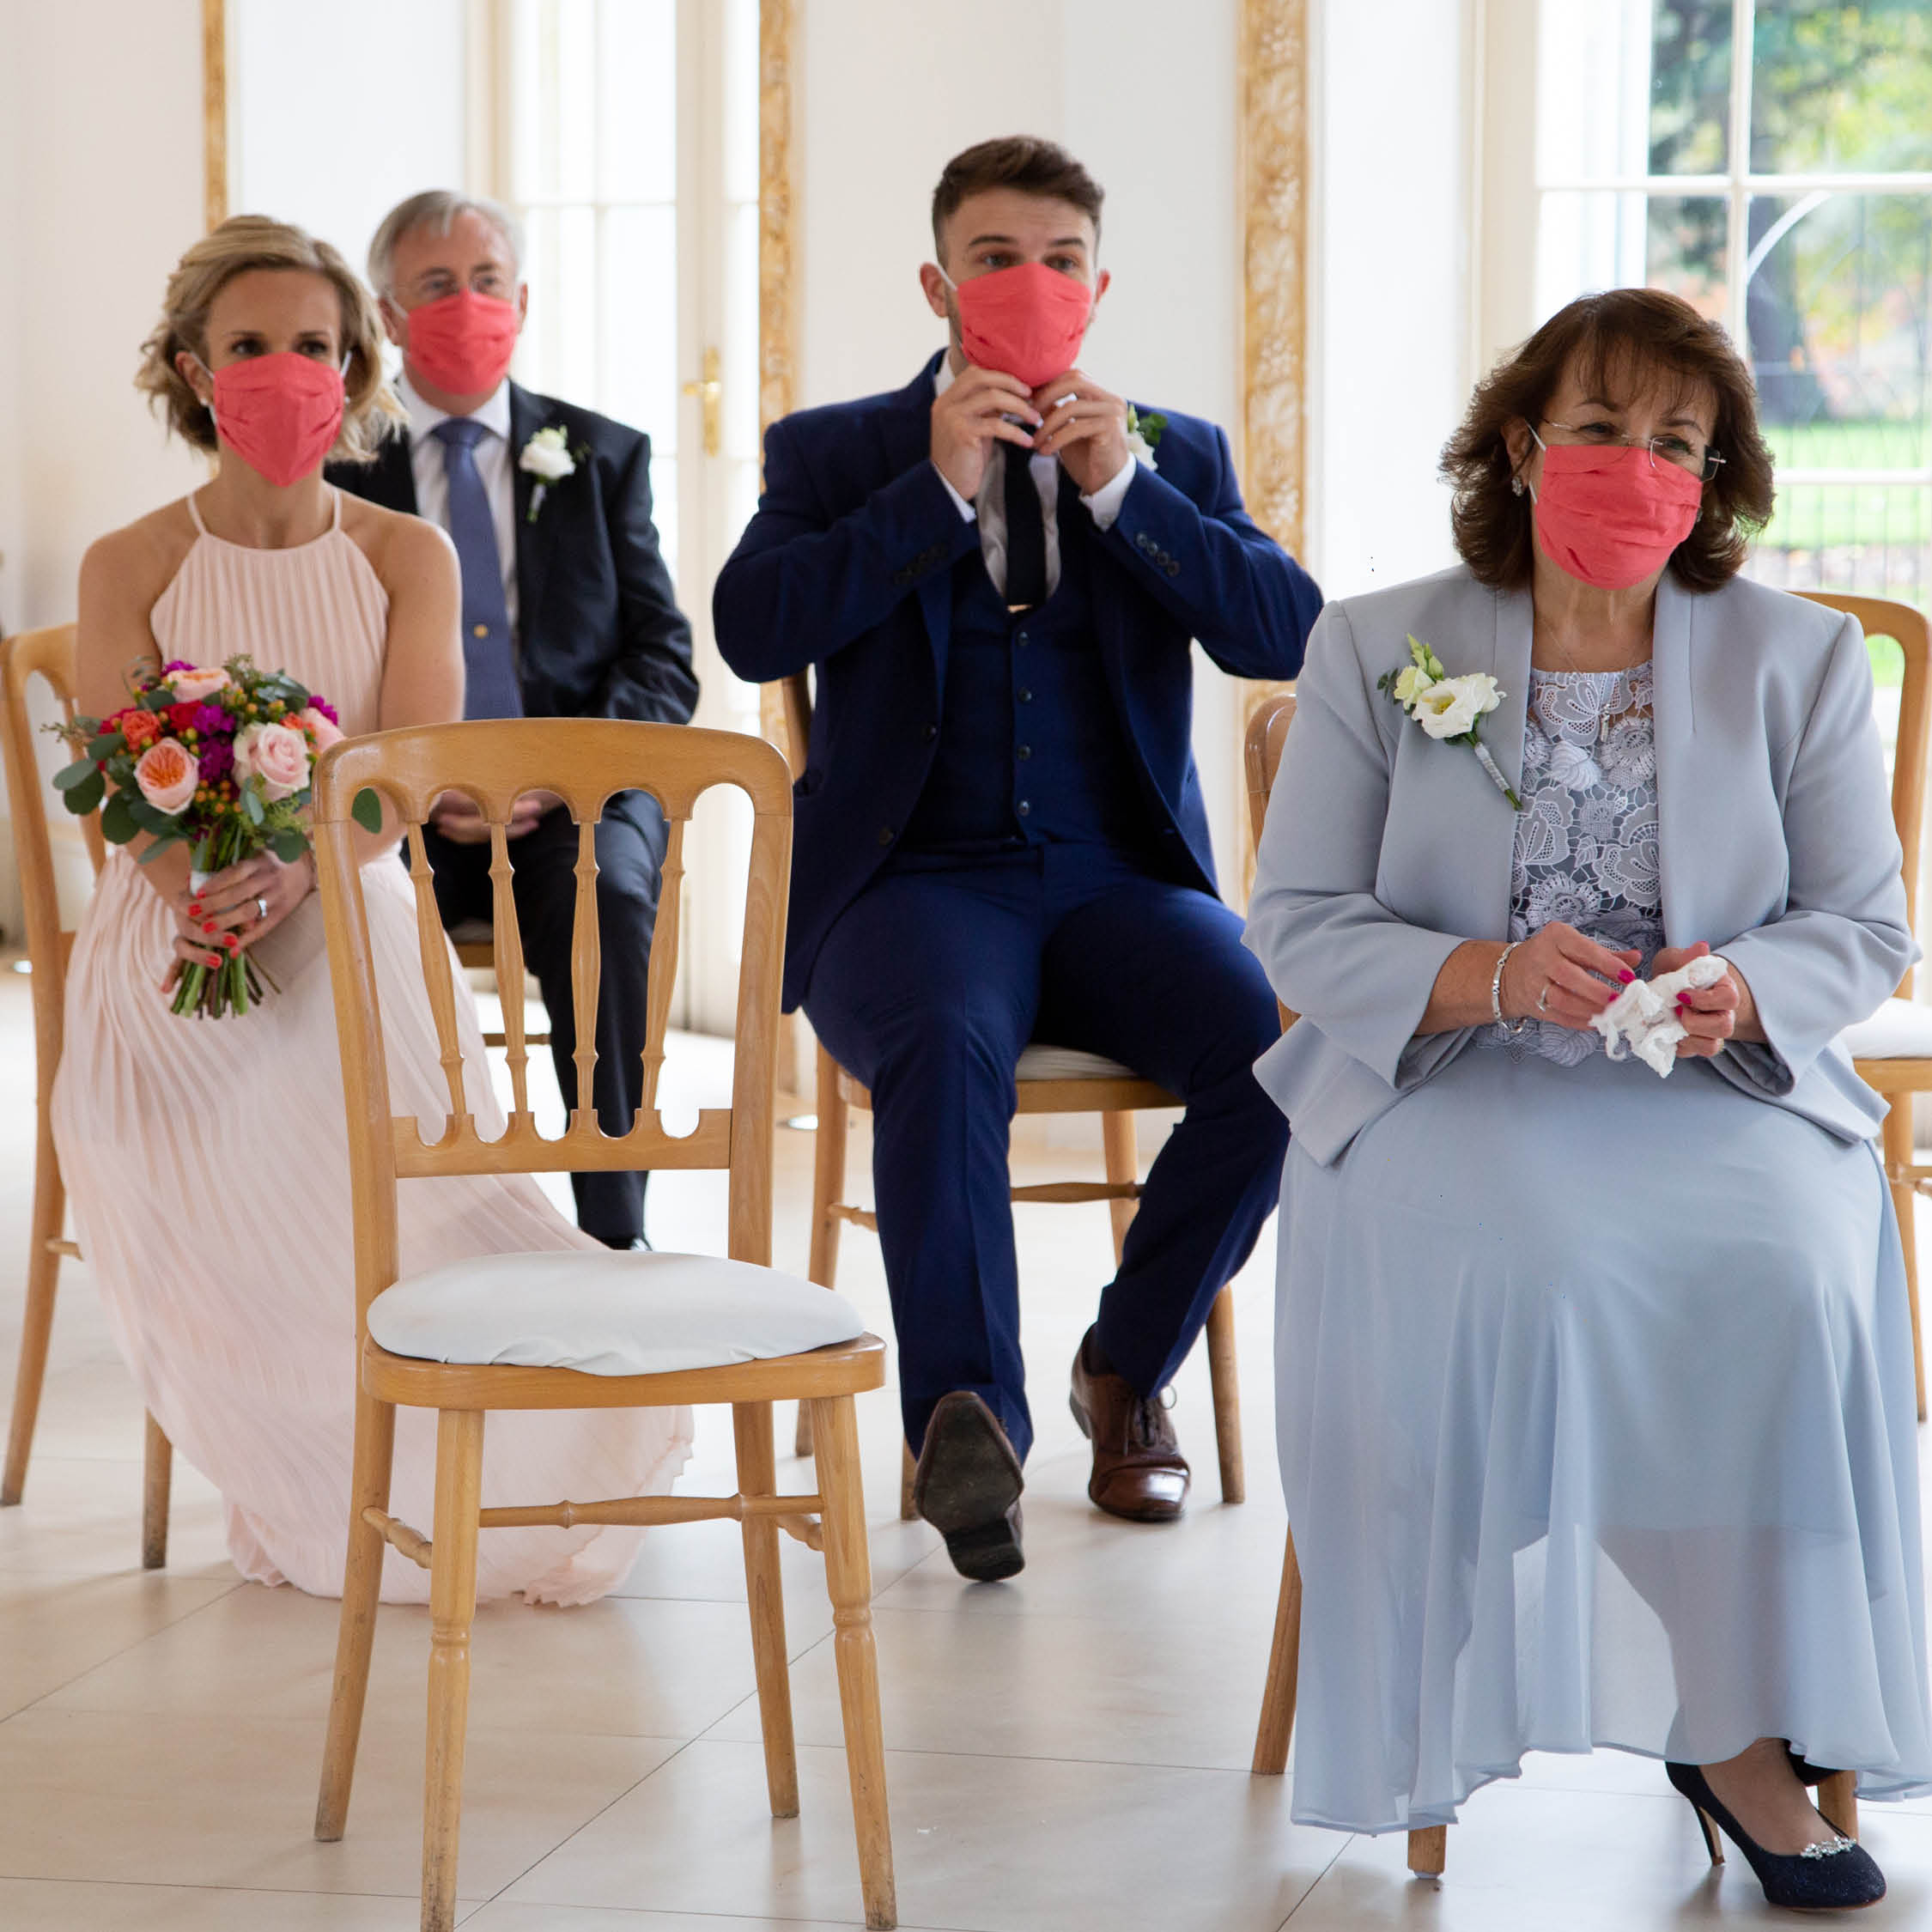 Things to Consider When Your Wedding Date is Affected by the Coronavirus number of guests